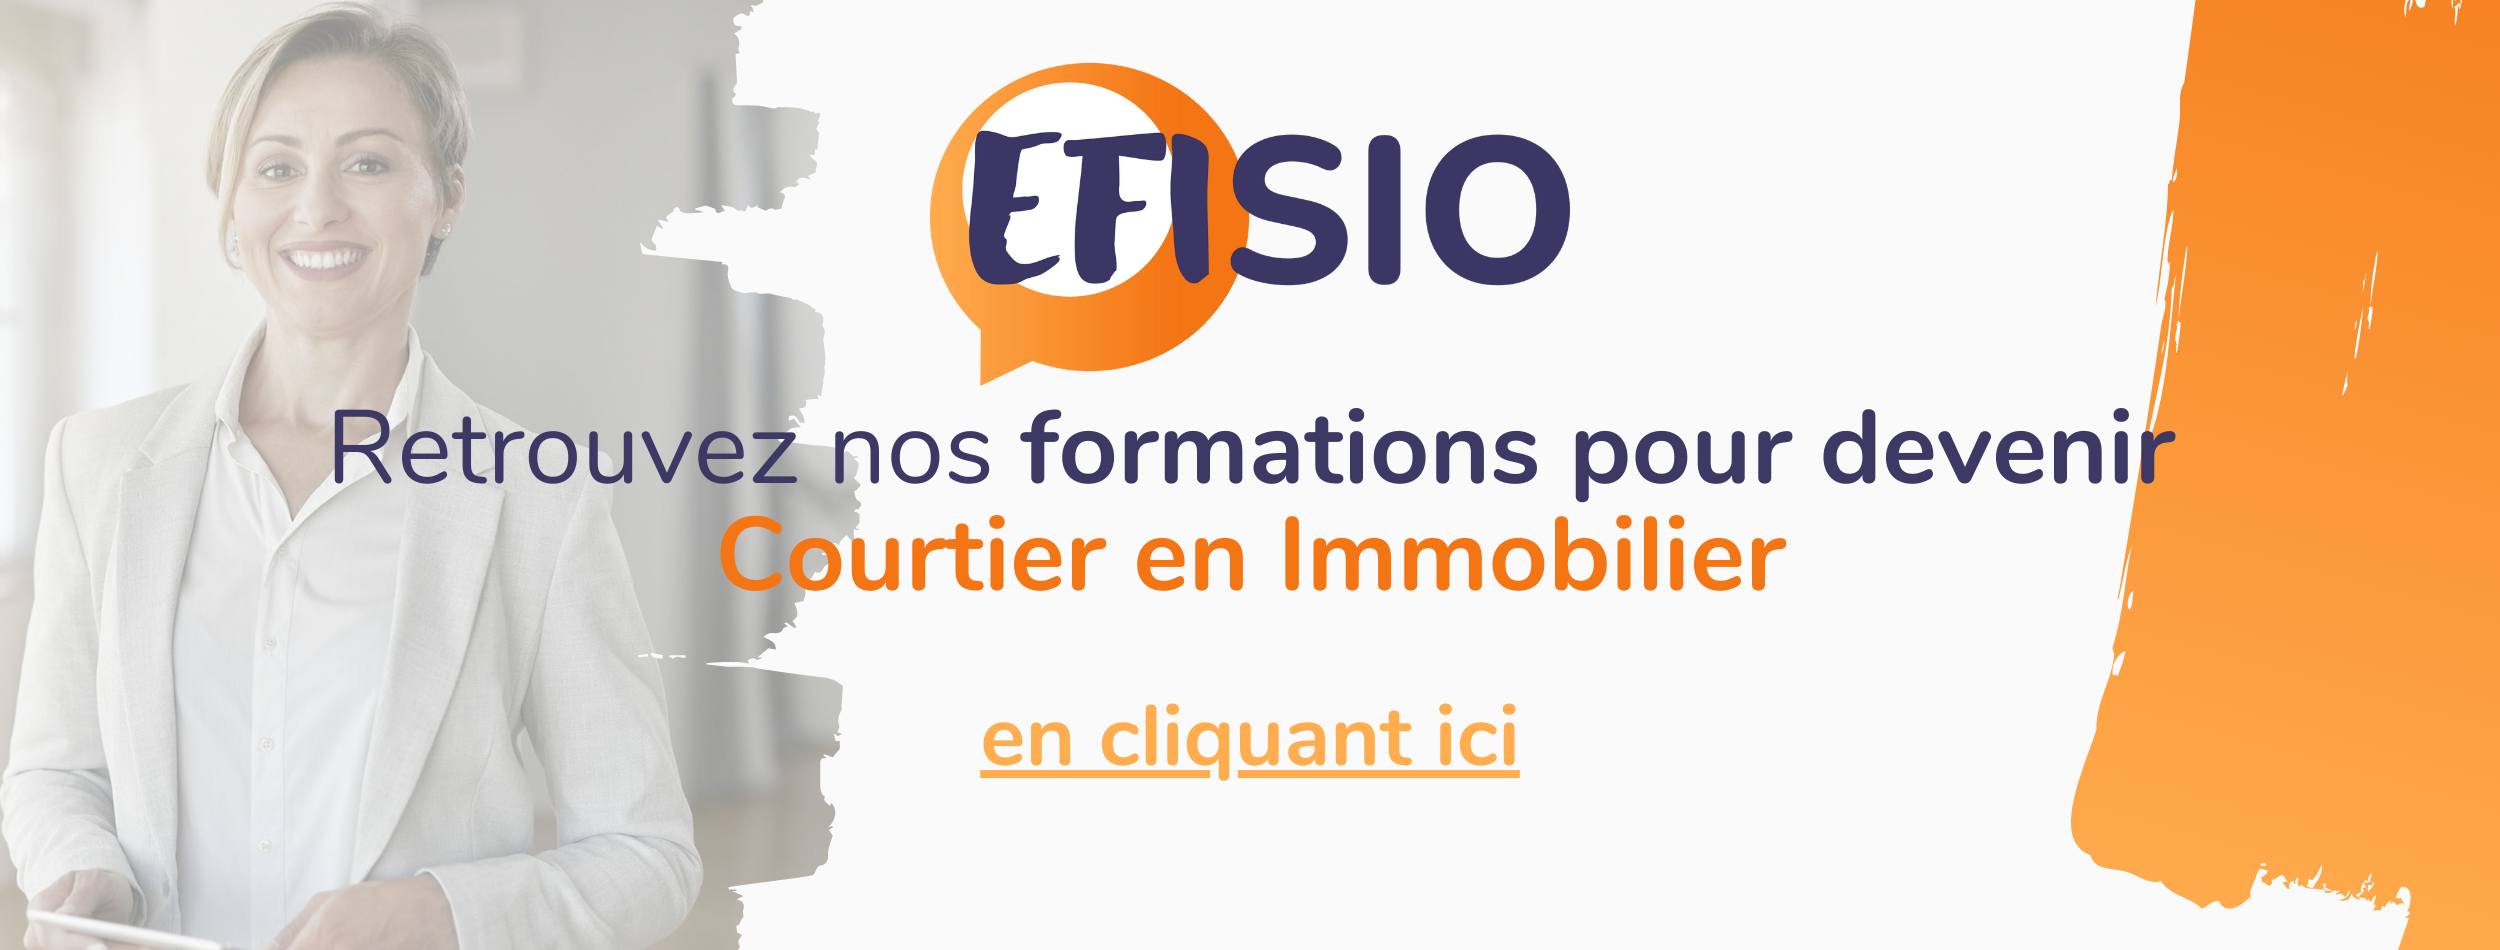 Formation courtier en immobilier